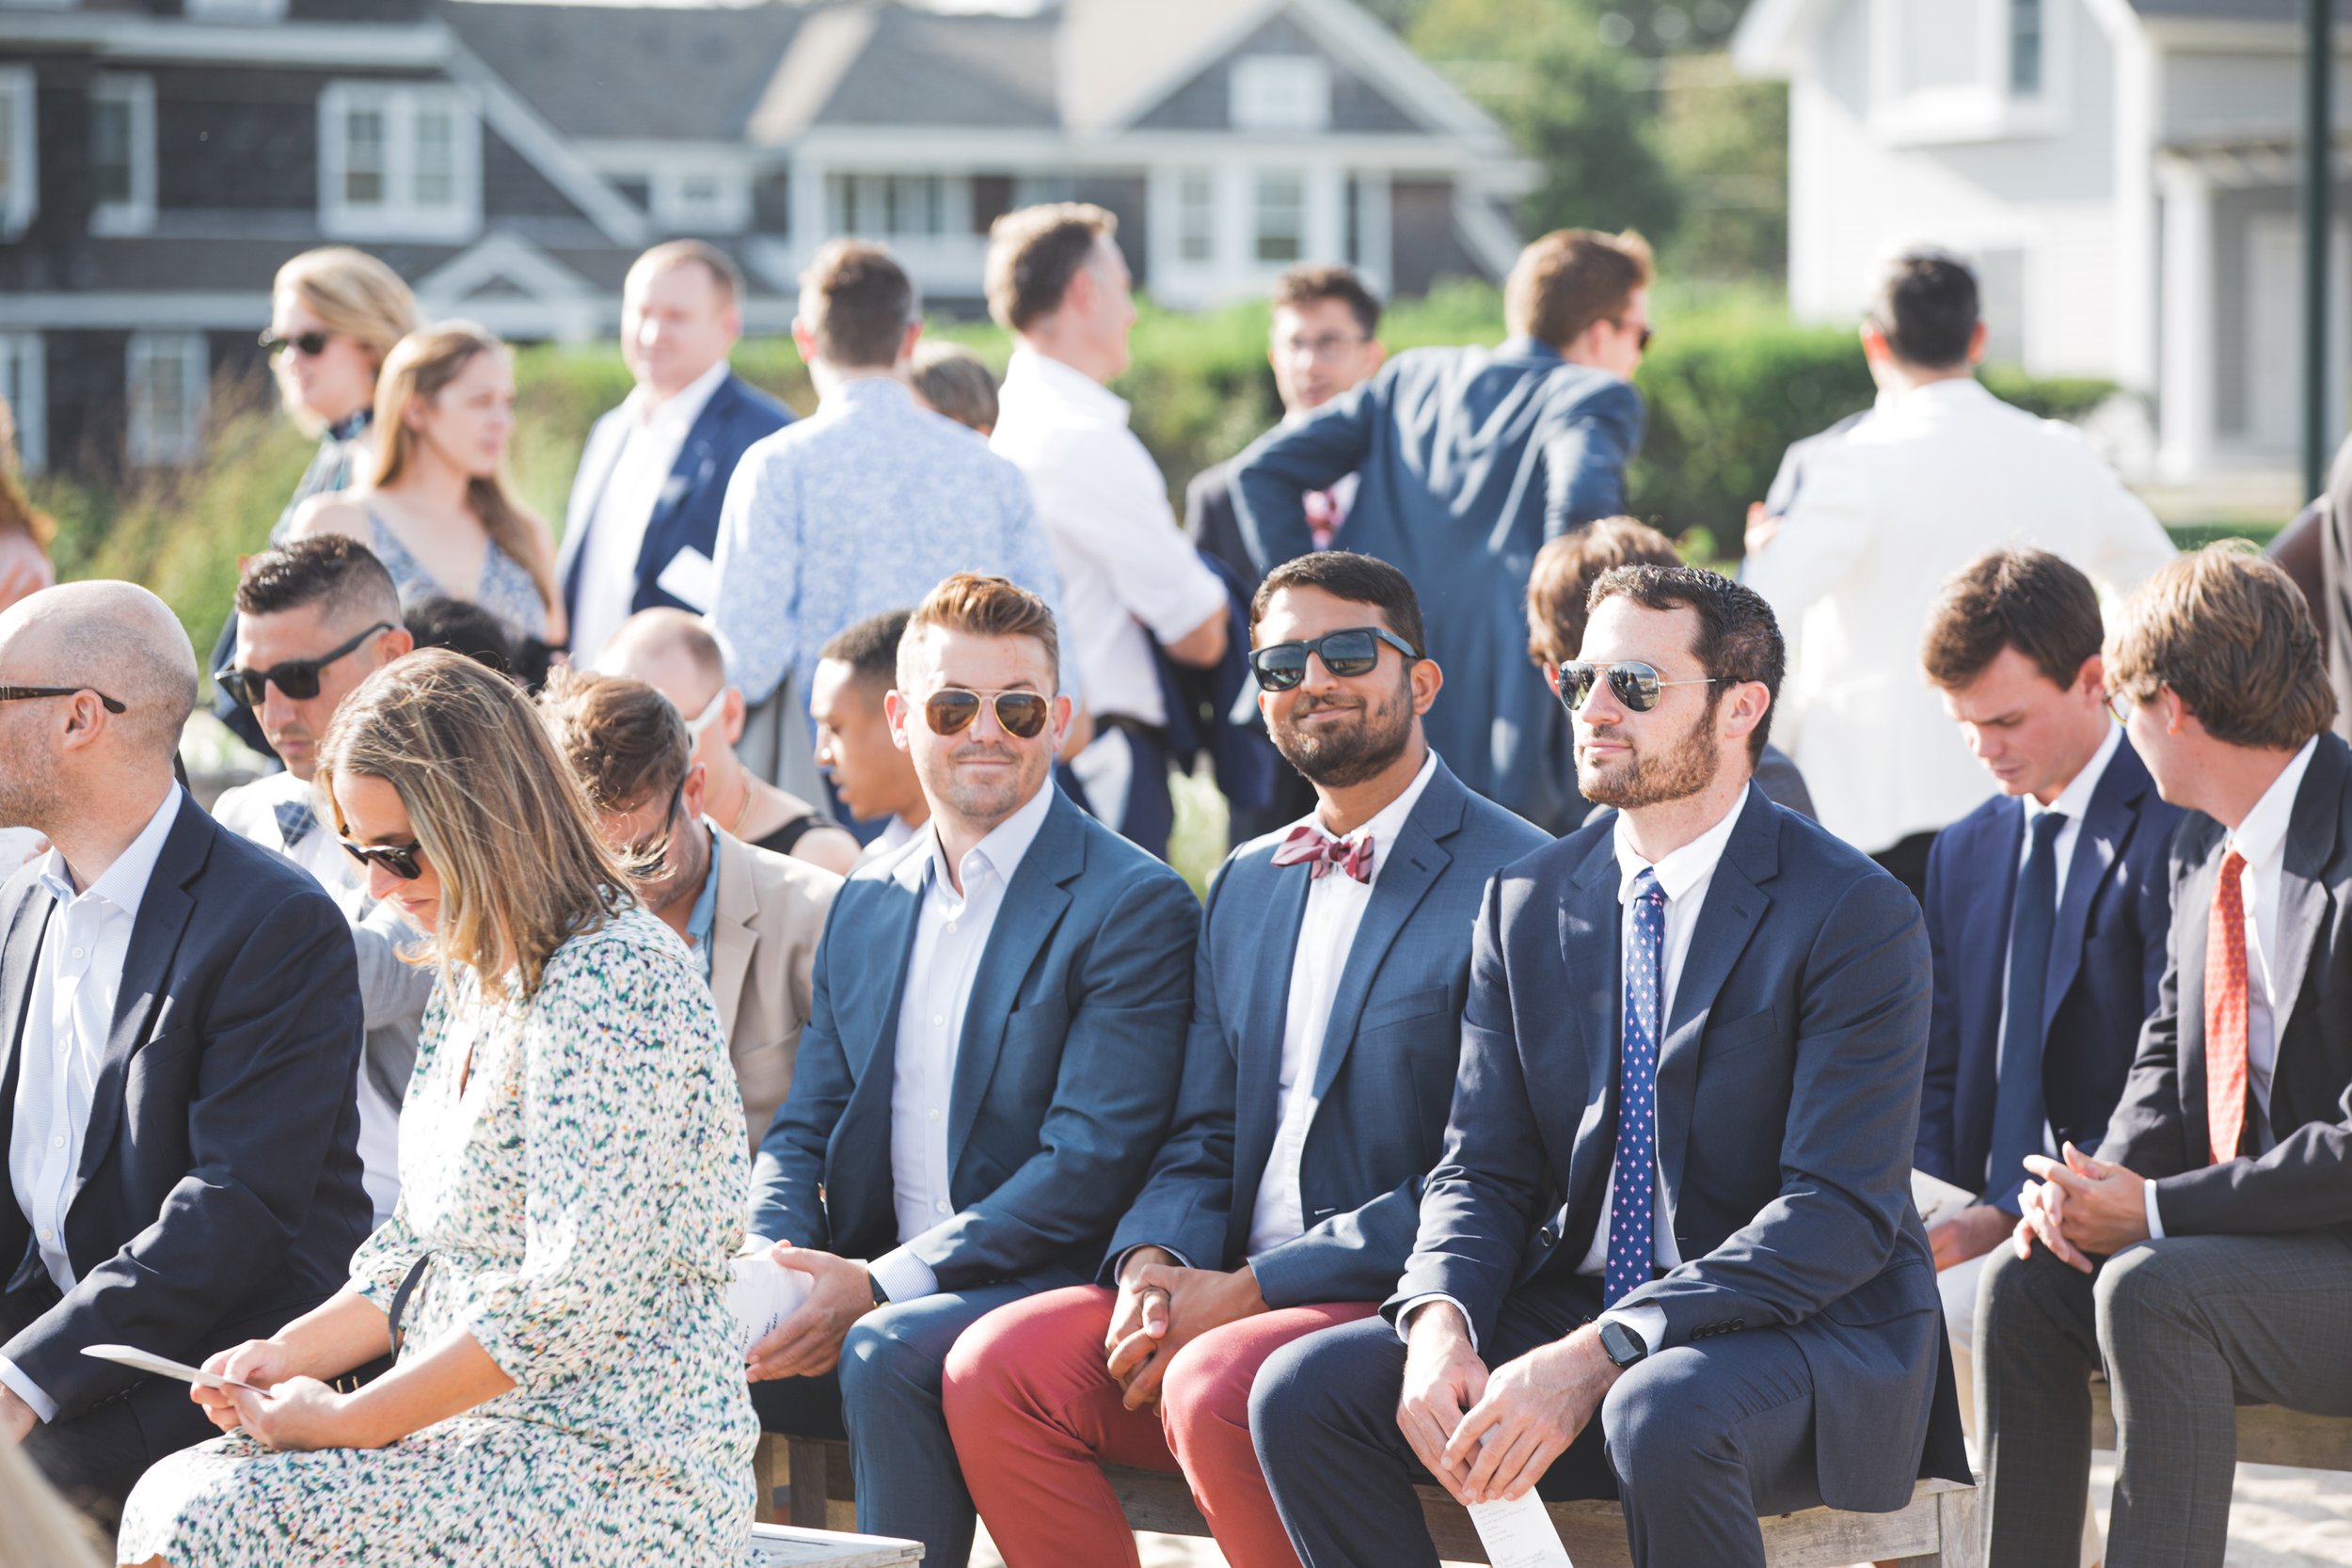 Wedding Guests Await the Grooms' Arrival in Old Saybrook, CT